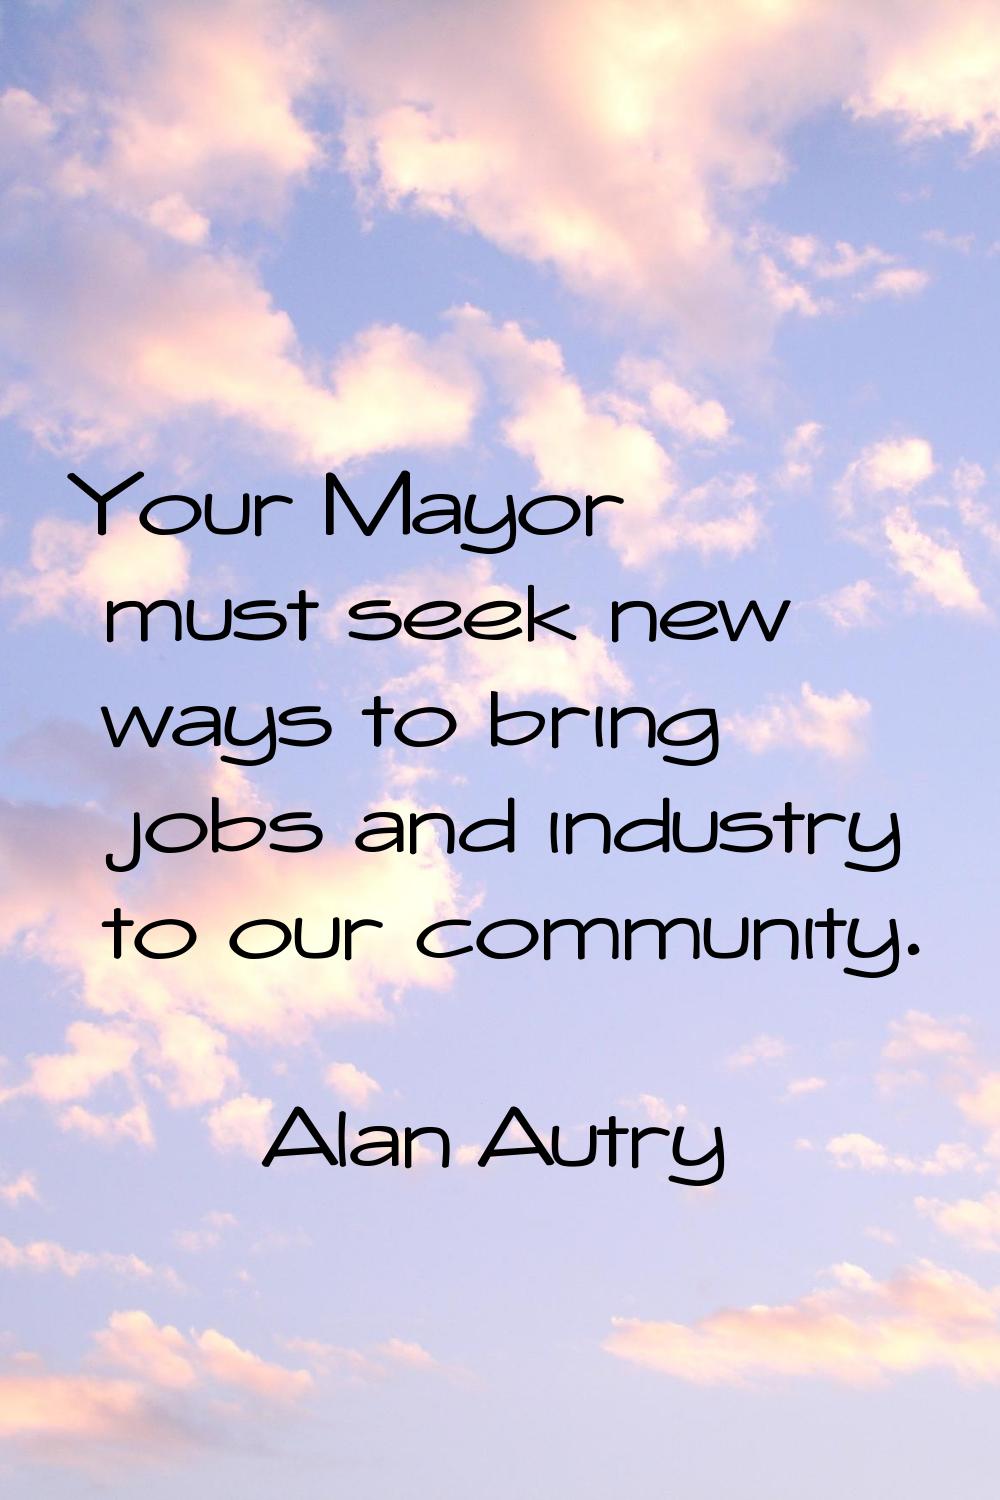 Your Mayor must seek new ways to bring jobs and industry to our community.